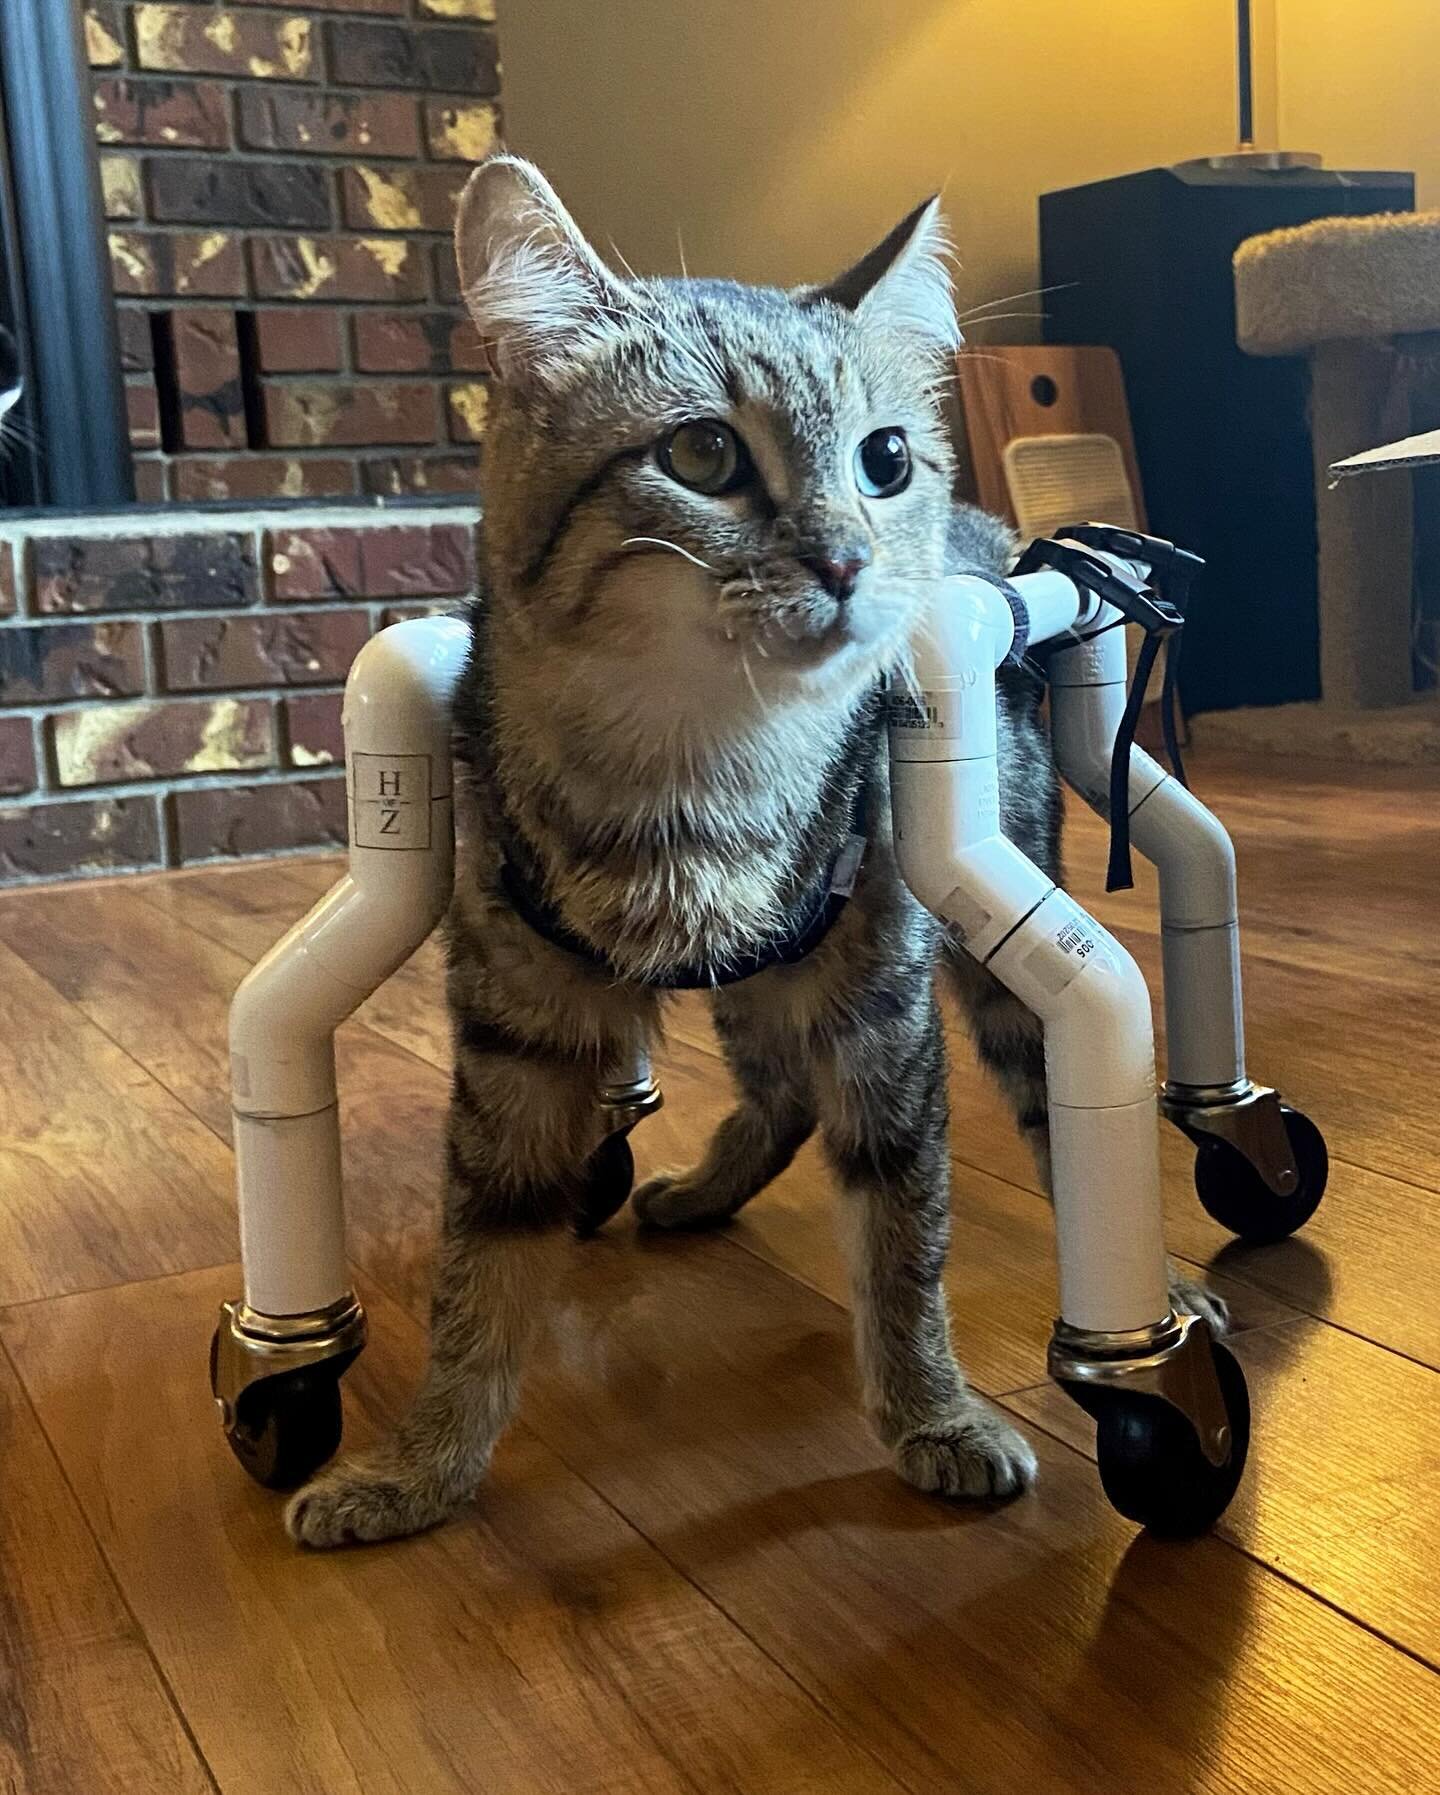 I had the immense pleasure of being able to make wheelchairs for Ping and Pong of the Cat Therapy and Rescue Society in Mission, BC. Both kittens wobble from their cerebellar hypoplasia, making mobility difficult. As you can see in the video, Ping&rs